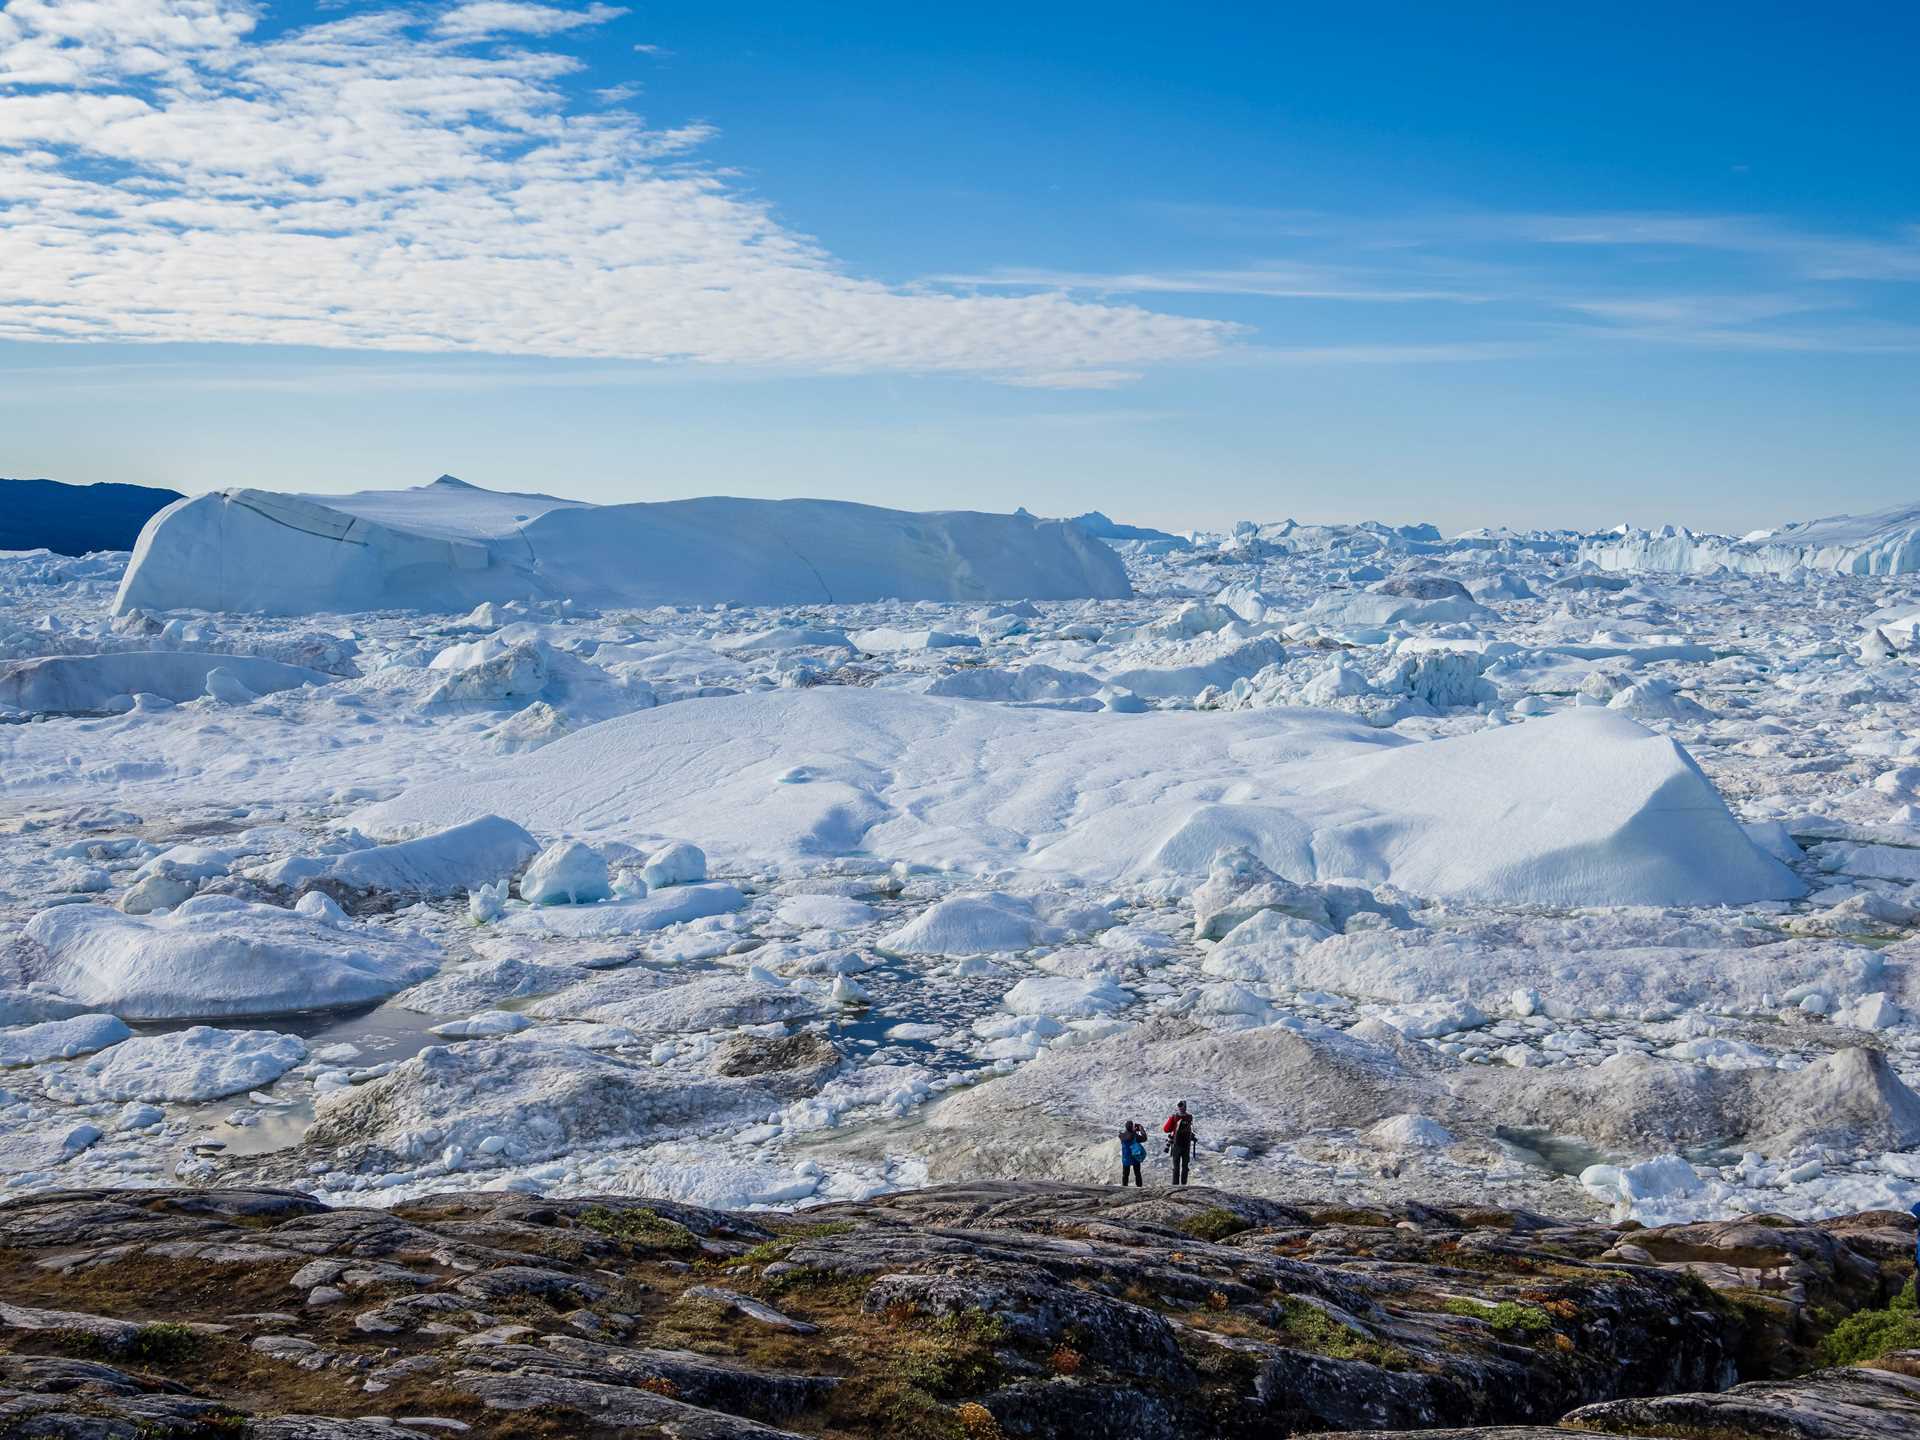 Hikers in front of the Ilulissat Icefjord, Greenland